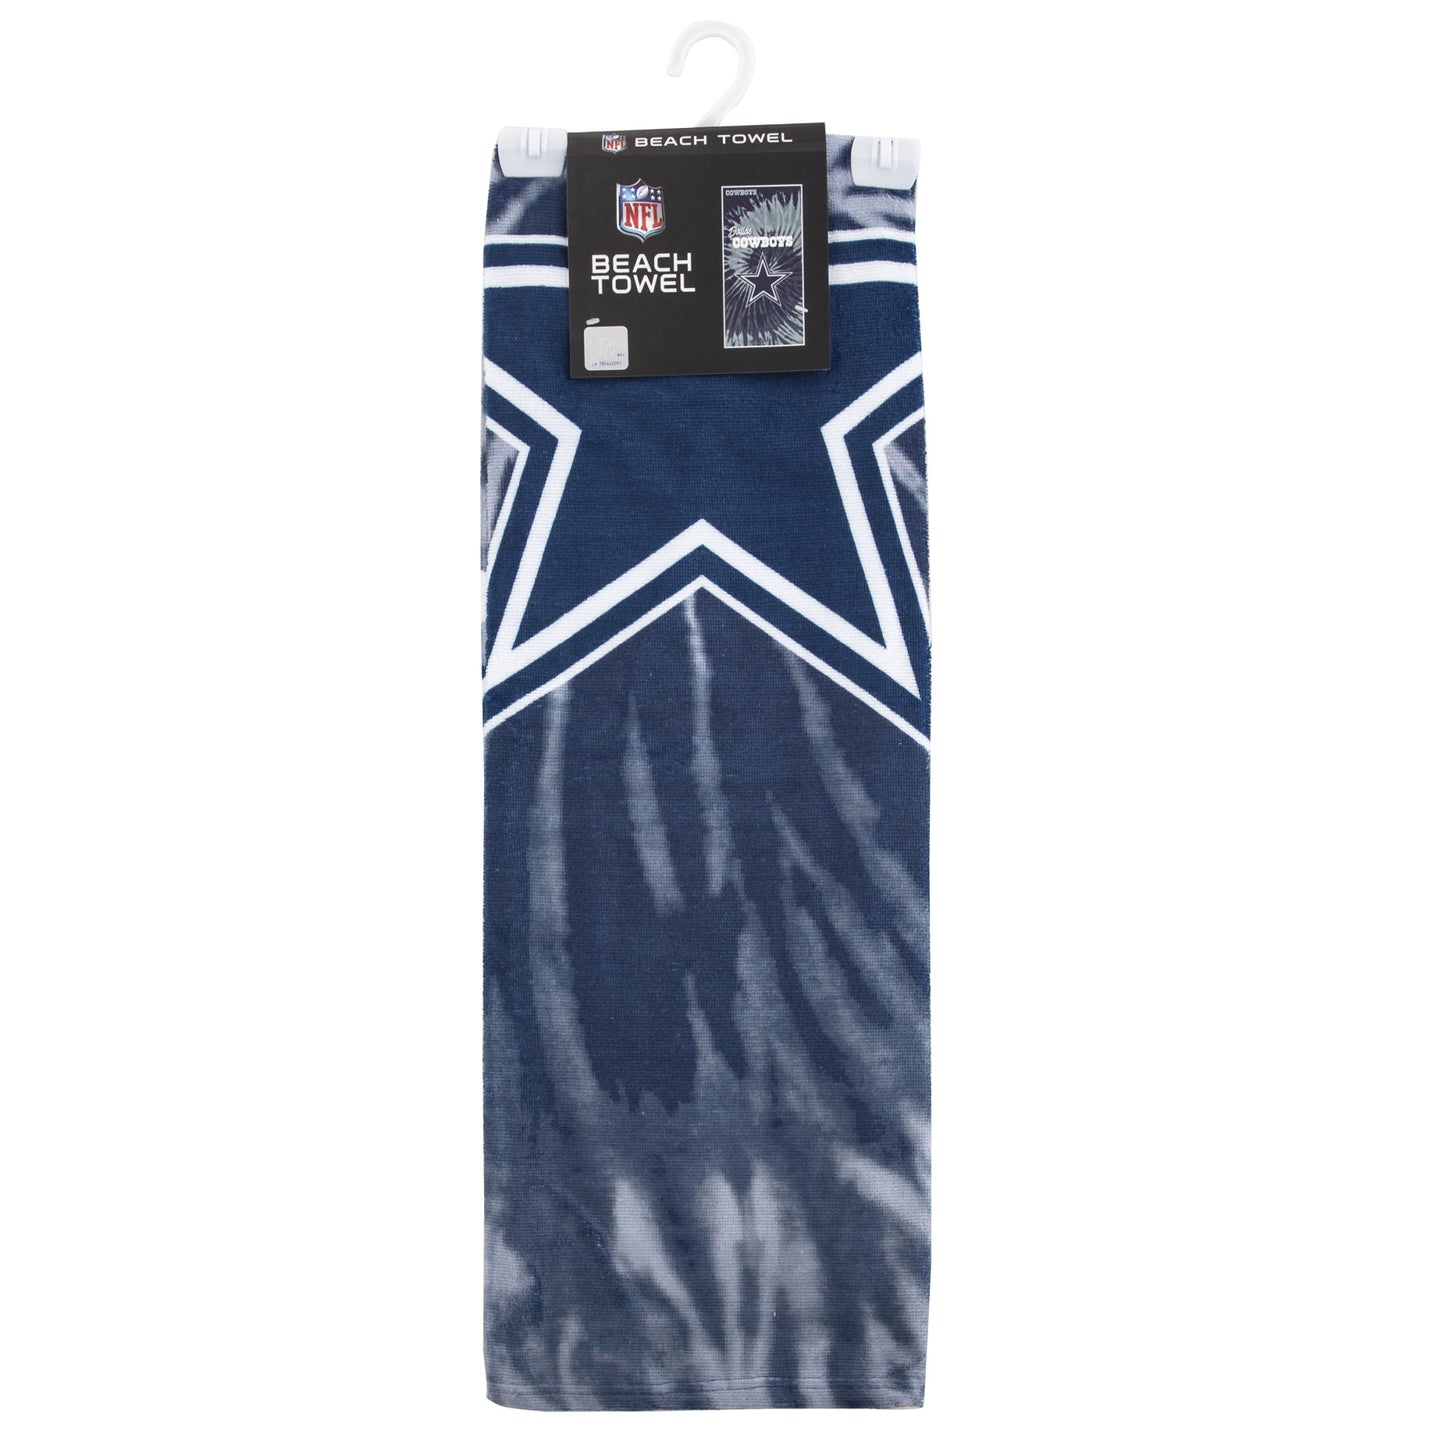 Cowboys OFFICIAL NFL "Psychedelic" Beach Towel; 30" x 60"